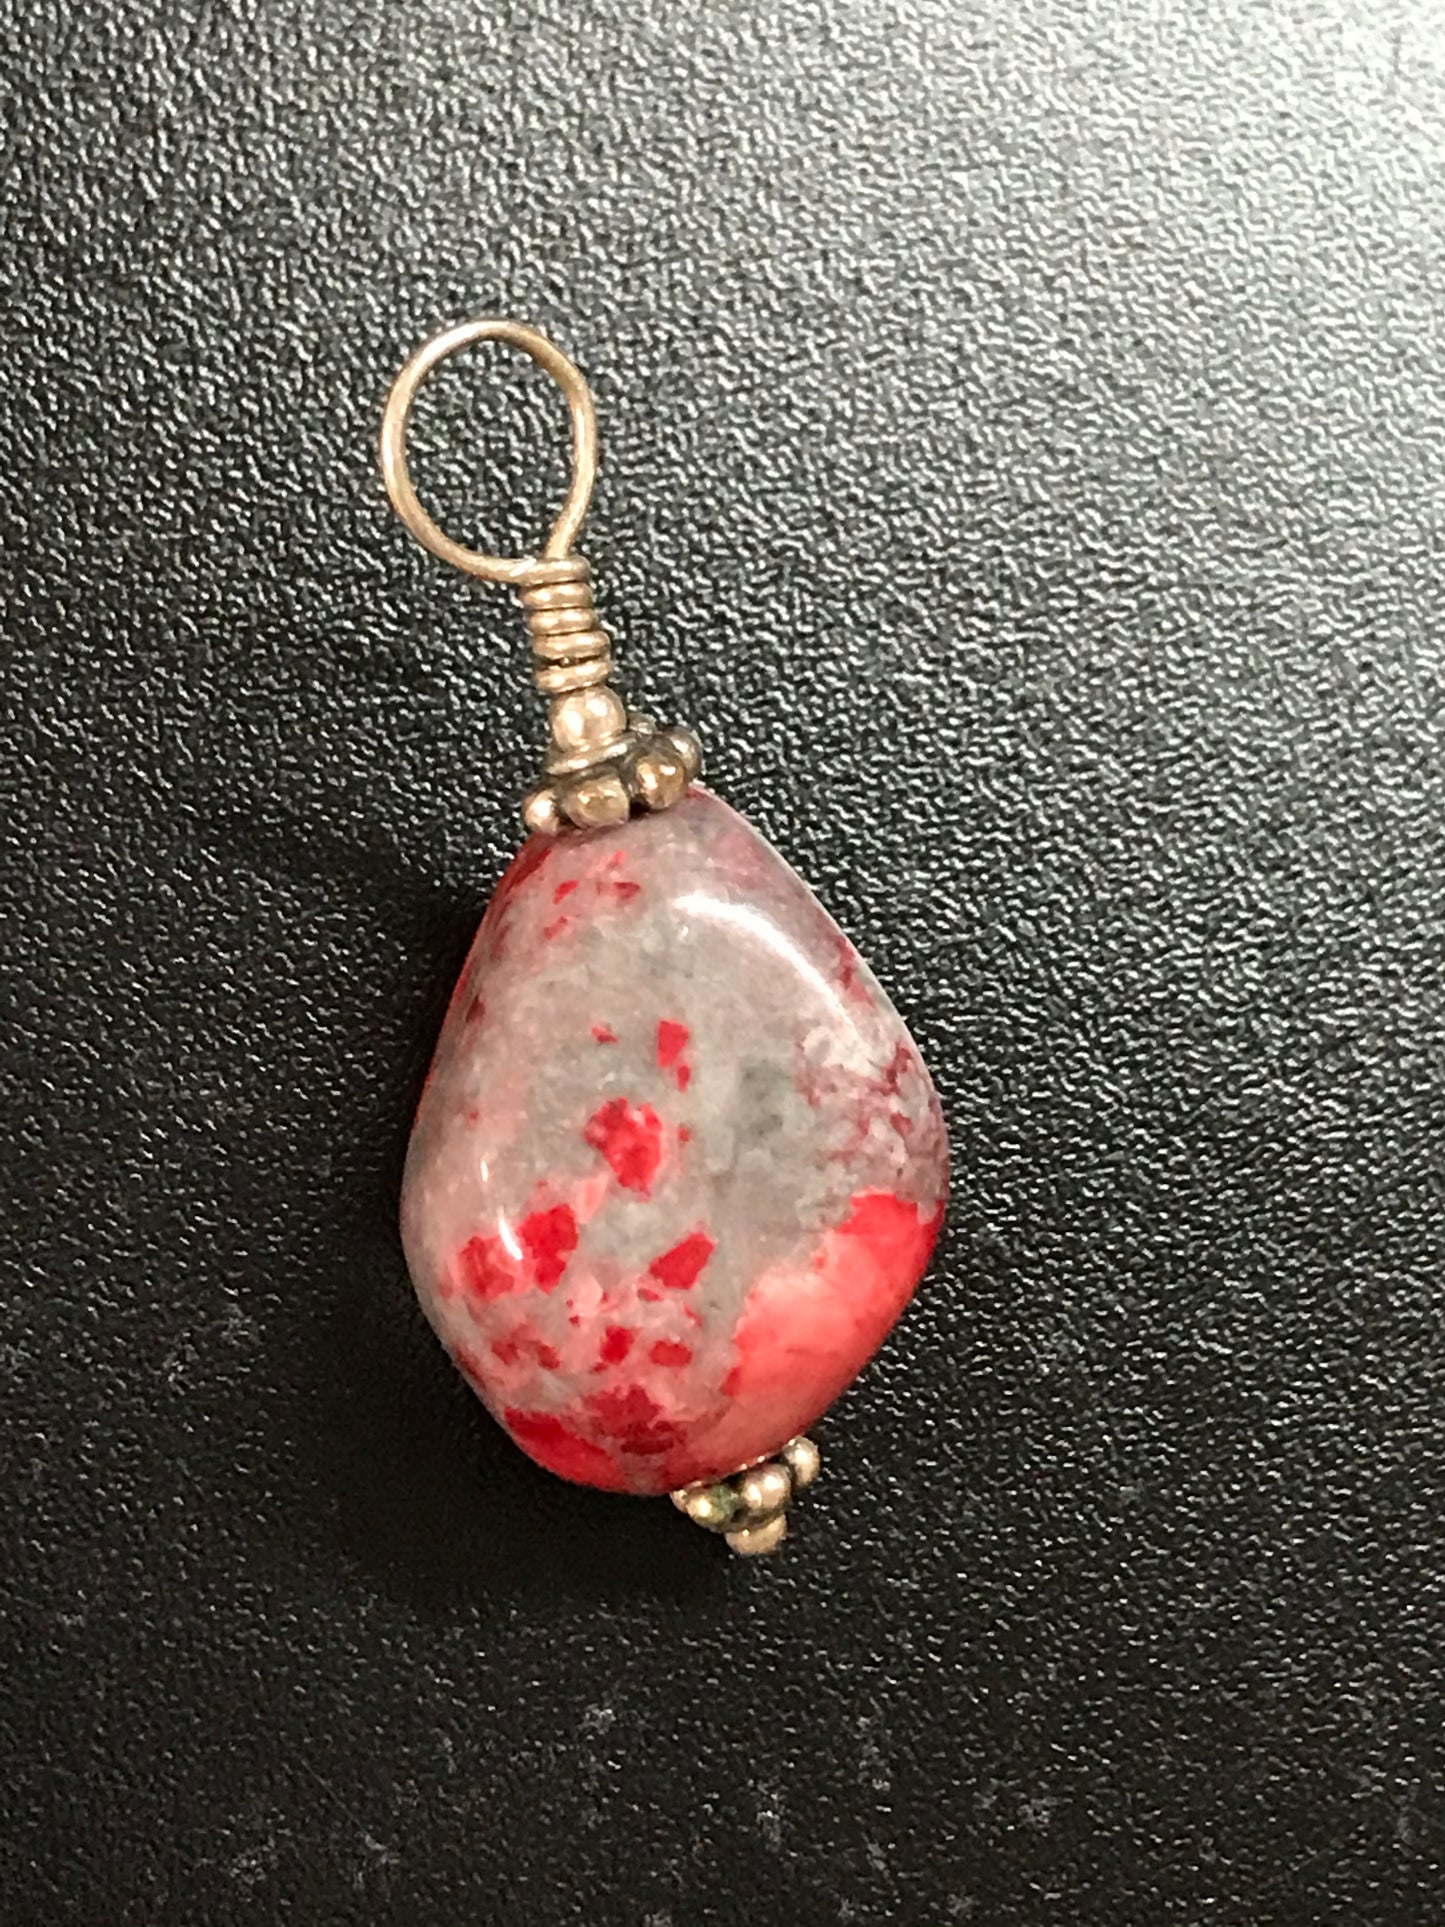 Red and Grey Stone and Silver Pendant